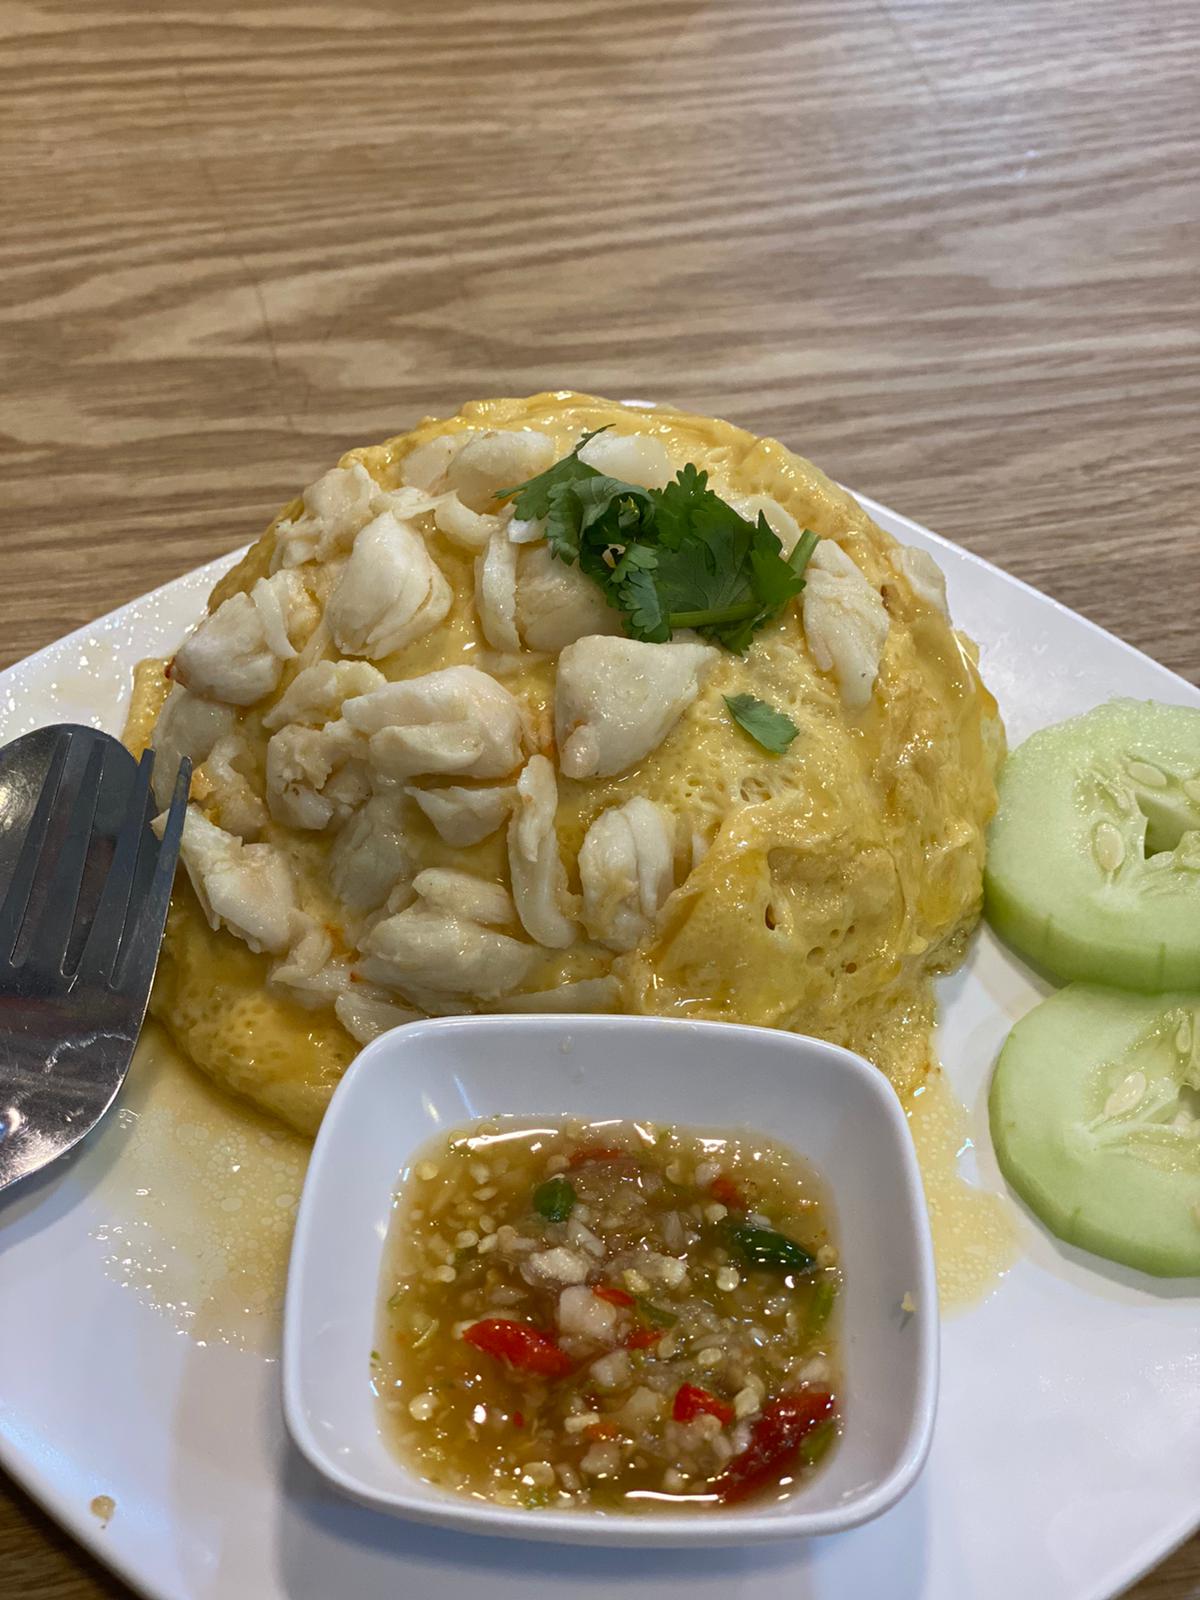 Thai eatery in Golden Mile Complex sells $10 Omelette Crab Fried Rice with generous amount of crab meat - 2